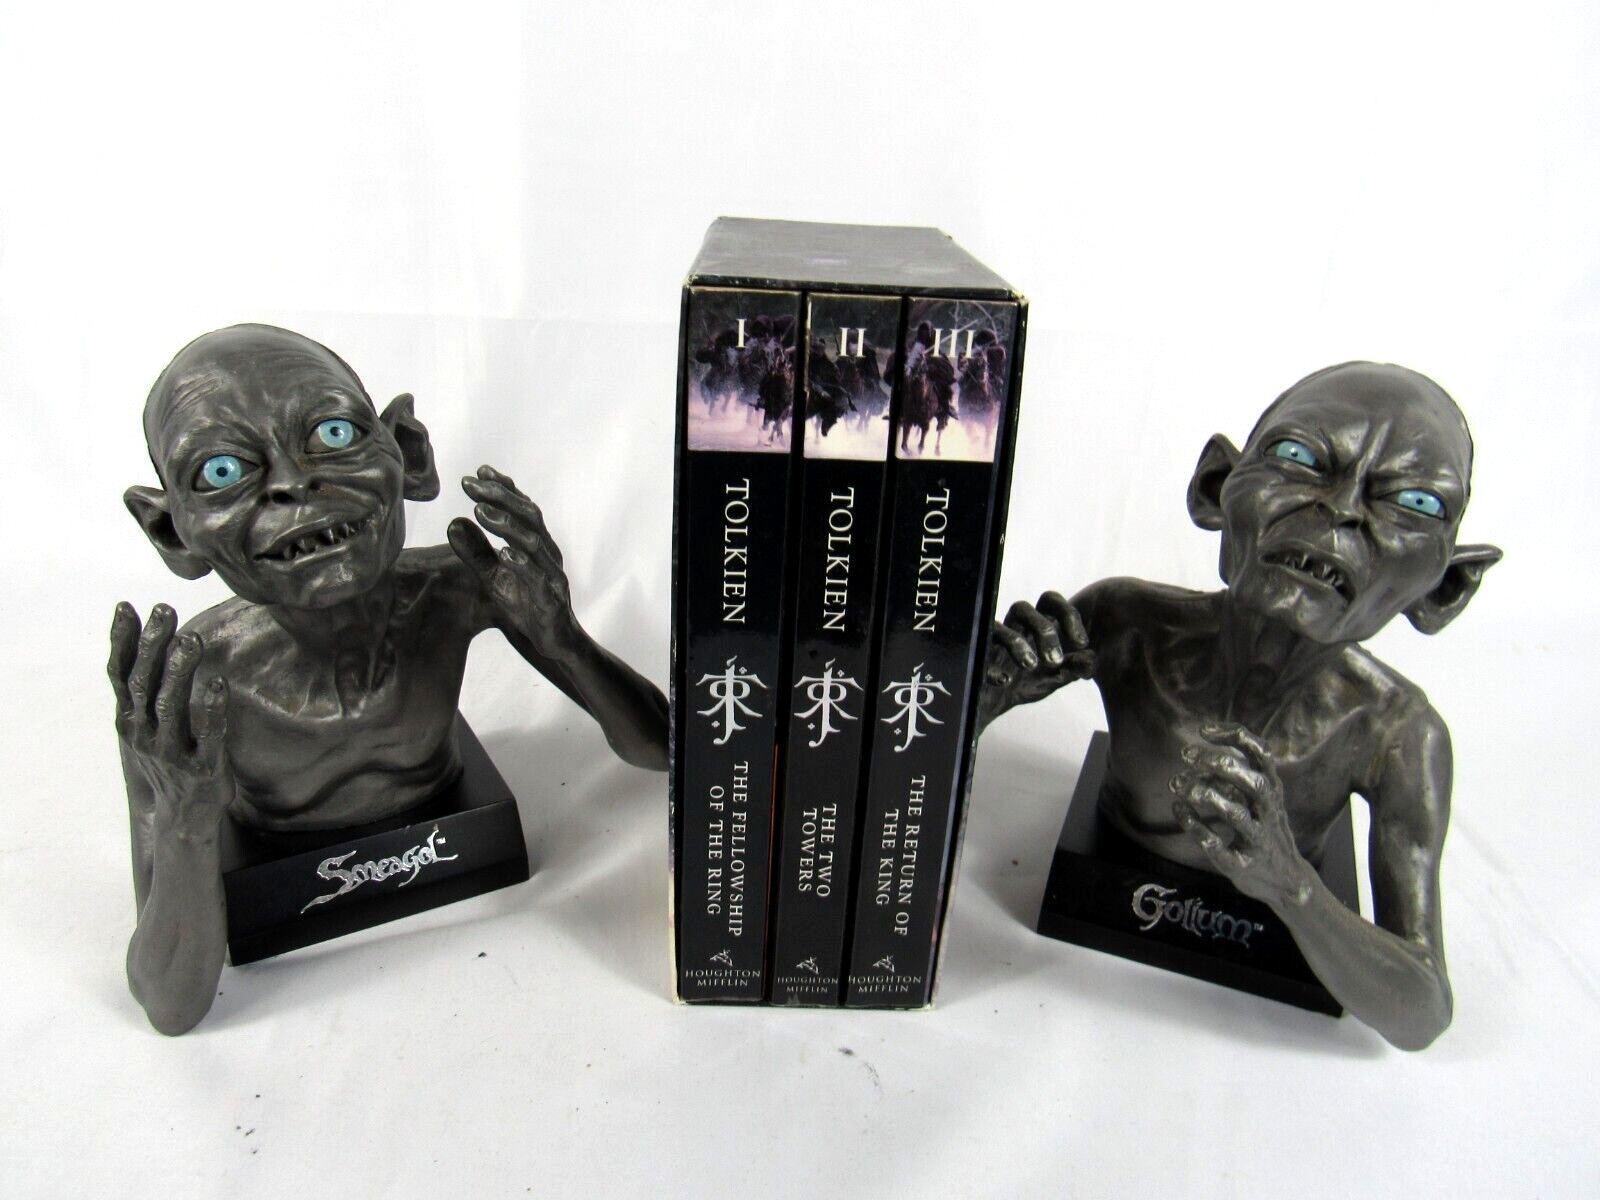 Noble Collection Gollum Smeagol Pewter Bookends Busts Lord Of The Rings Heavy